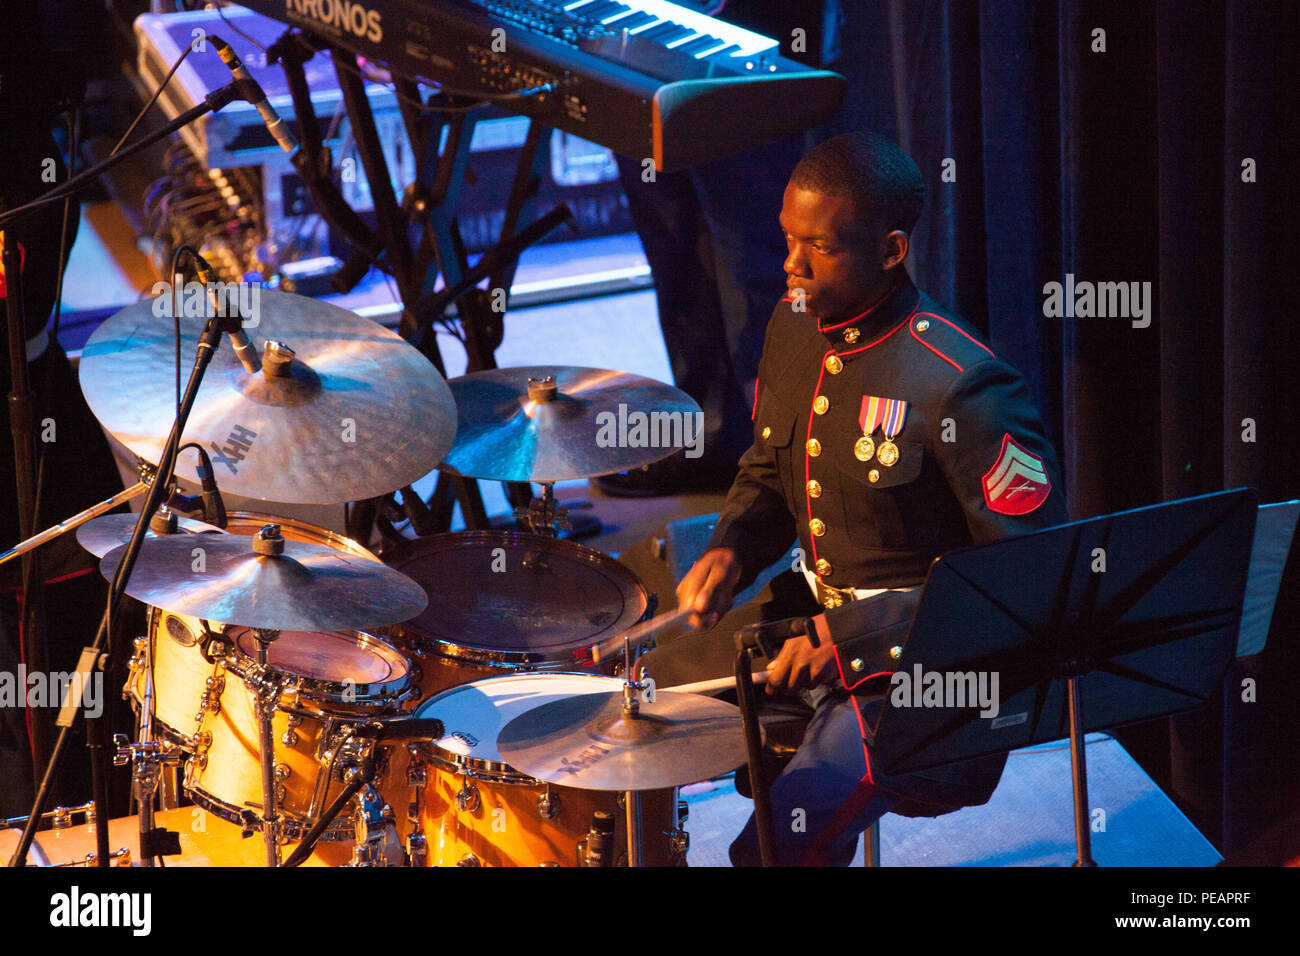 U.S. Marines Cpl. Randy West, Percussionist, with Marine Corps Band New Orleans performs for the celebration of the 240th Marine Corps Birthday Ball at Mardi Gras World, New Orleans, La., Nov. 21, 2015. This year’s celebration honors those past, present, and future Marines throughout history and marks the 240th Marine Corps Birthday since its founding on Nov. 10, 1775. (U.S. Marine Corps photo by Kimberly Aguirre/Released) Stock Photo